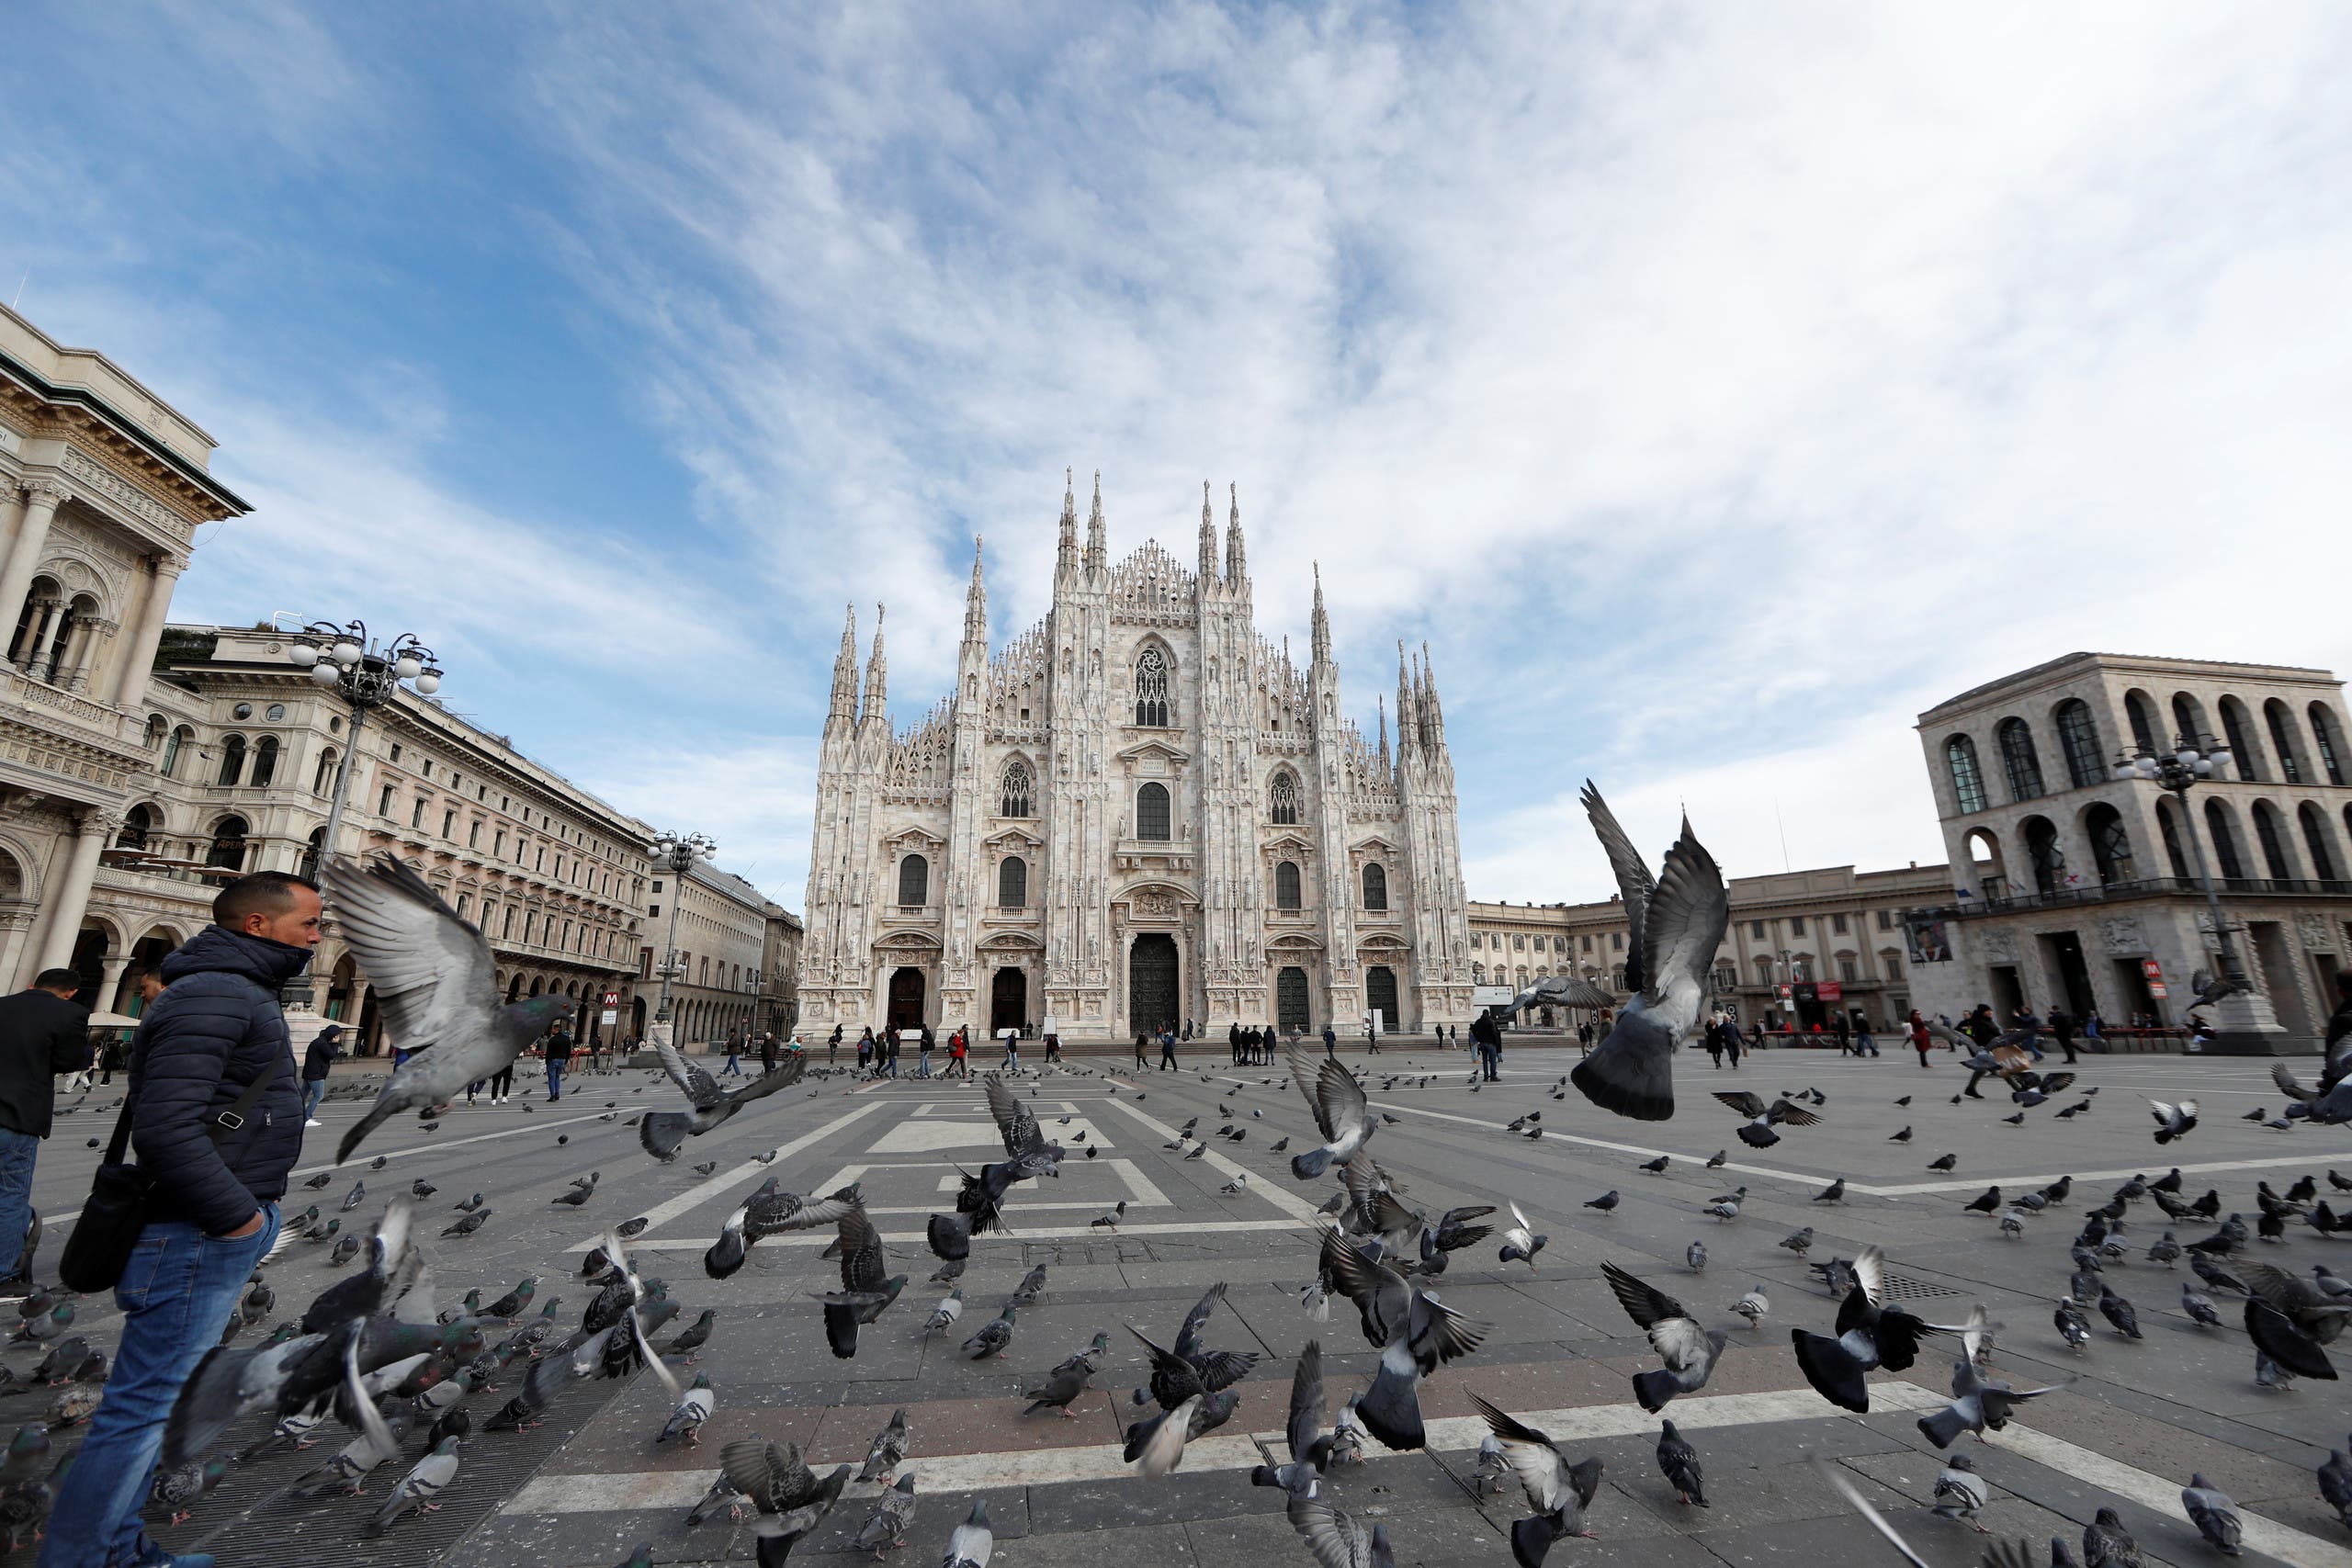 A general view of empty Duomo square, as a coronavirus outbreak continues to grow in northern Italy, in Milan, Italy, February 26, 2020. (Reuters)